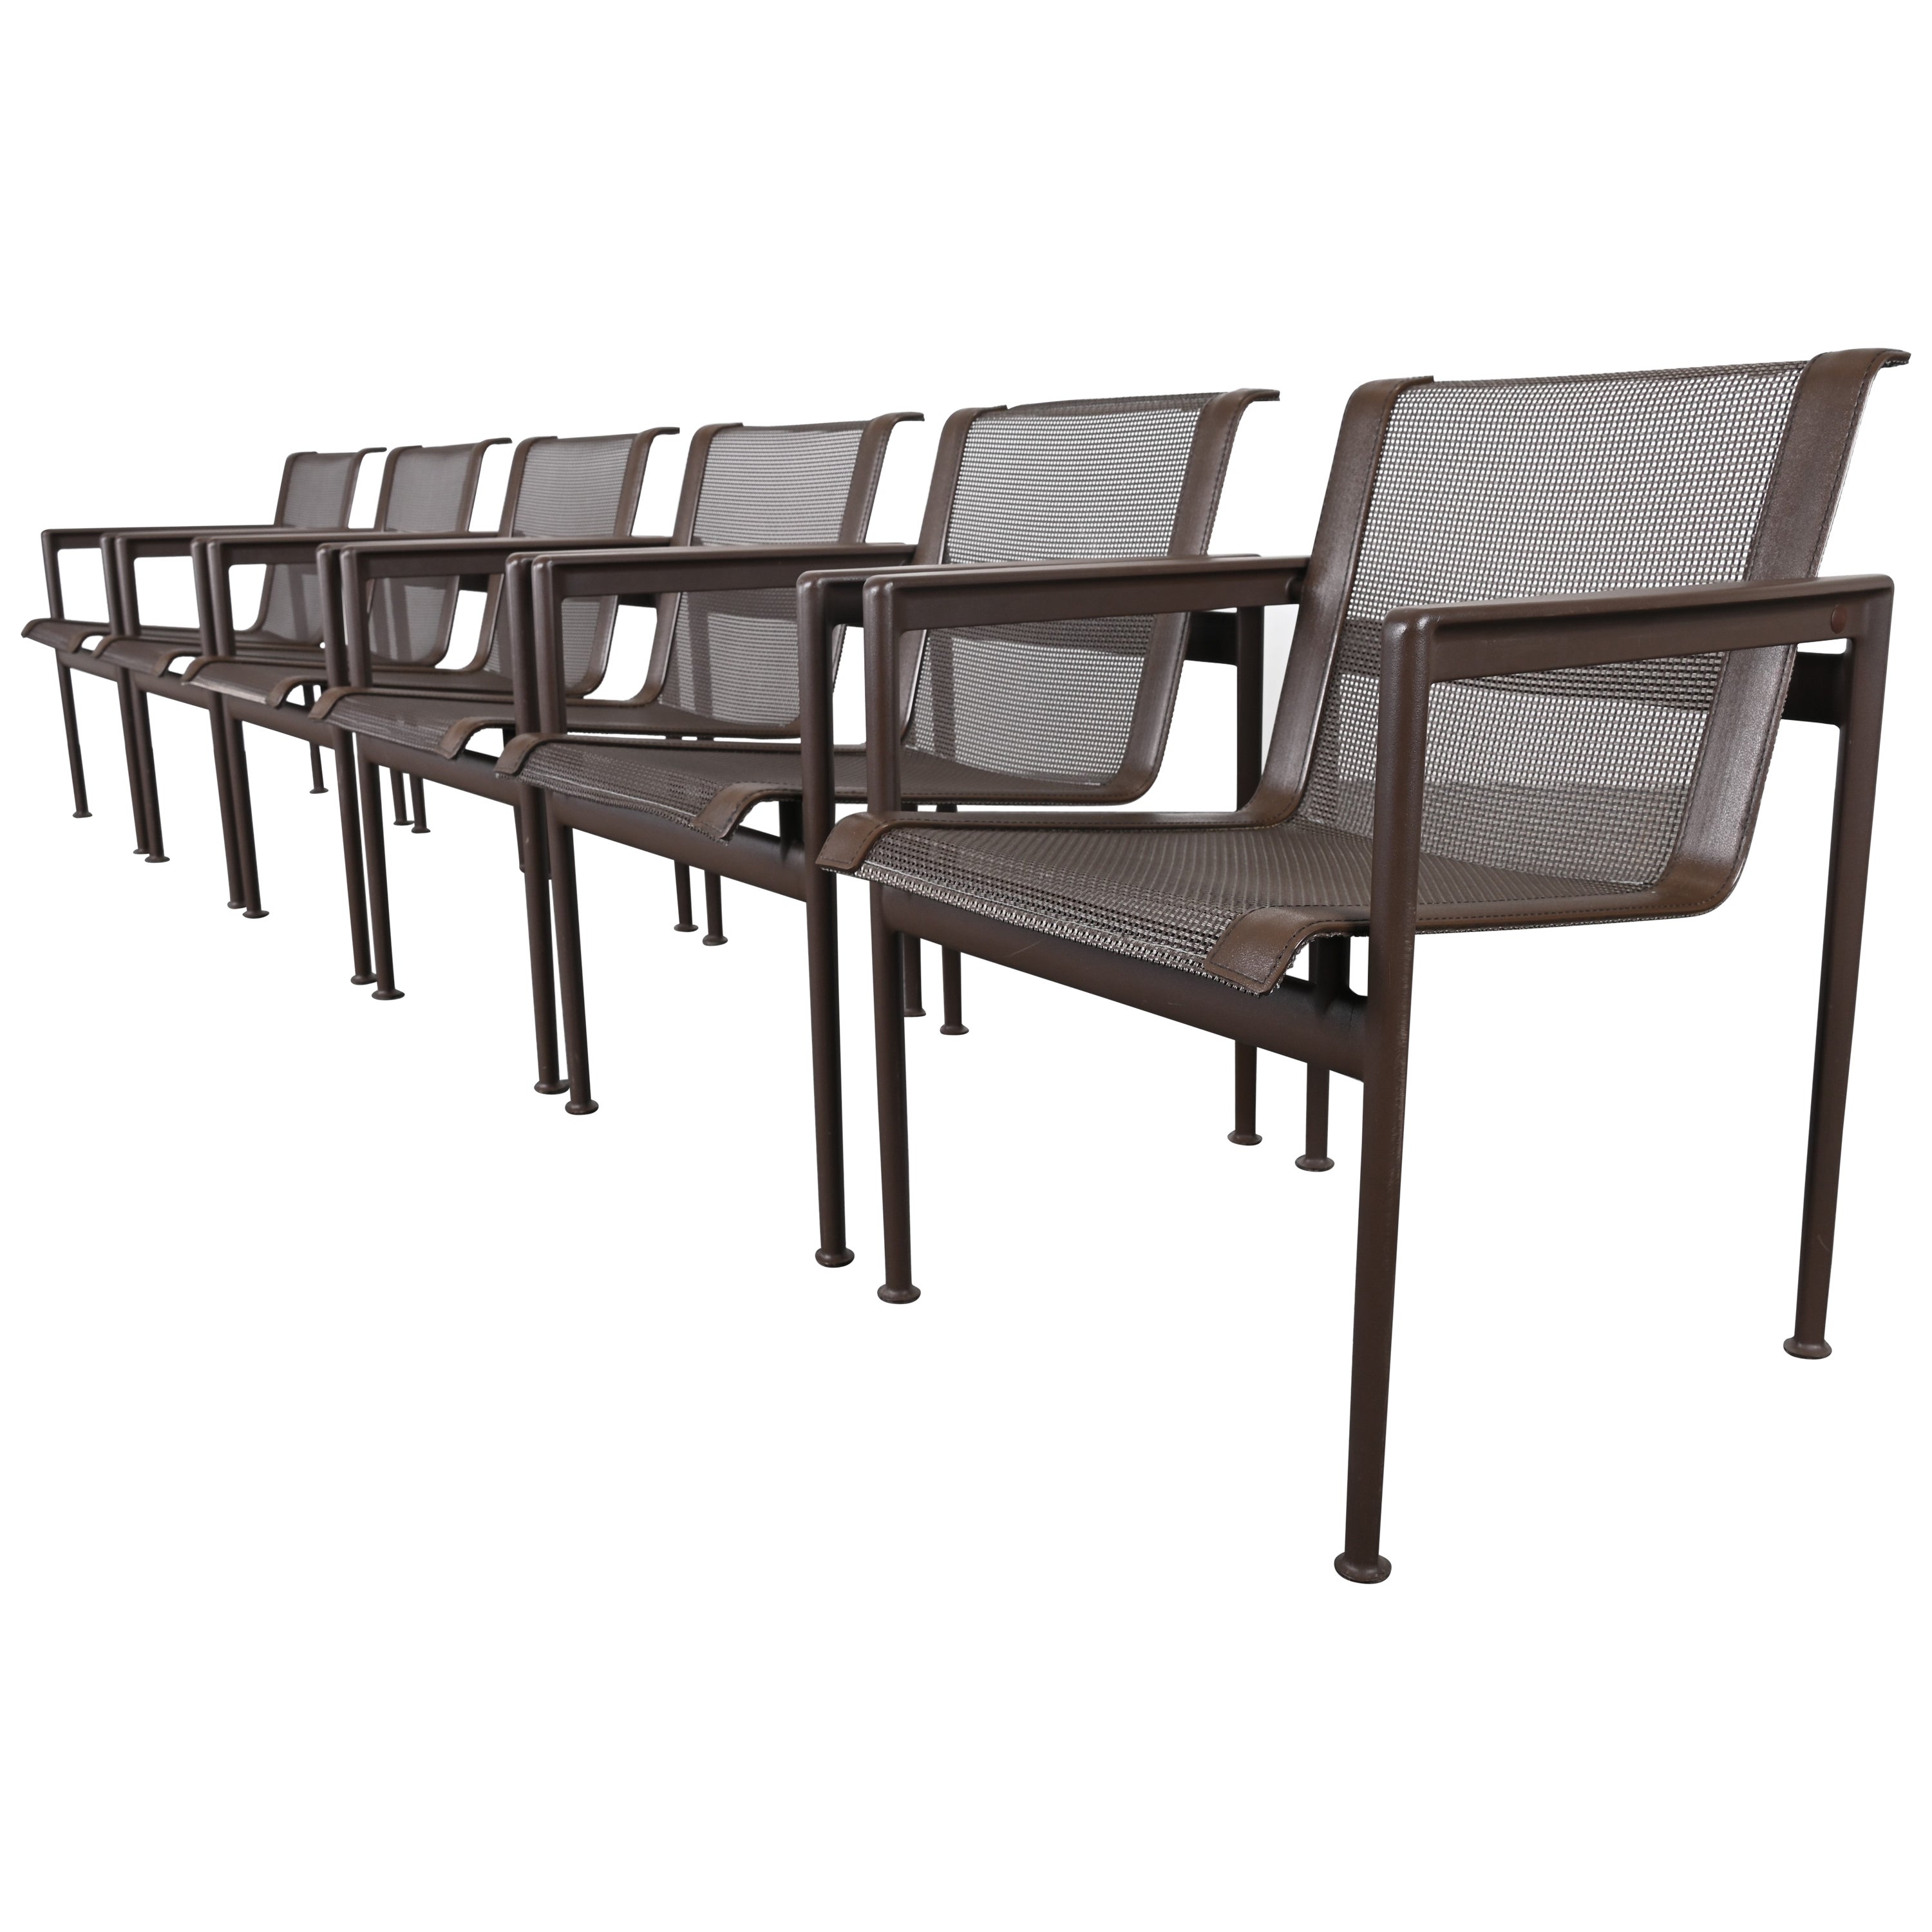 Set of Six Richard Schultz for Knoll 1966 Outdoor Dining Chairs in Chestnut